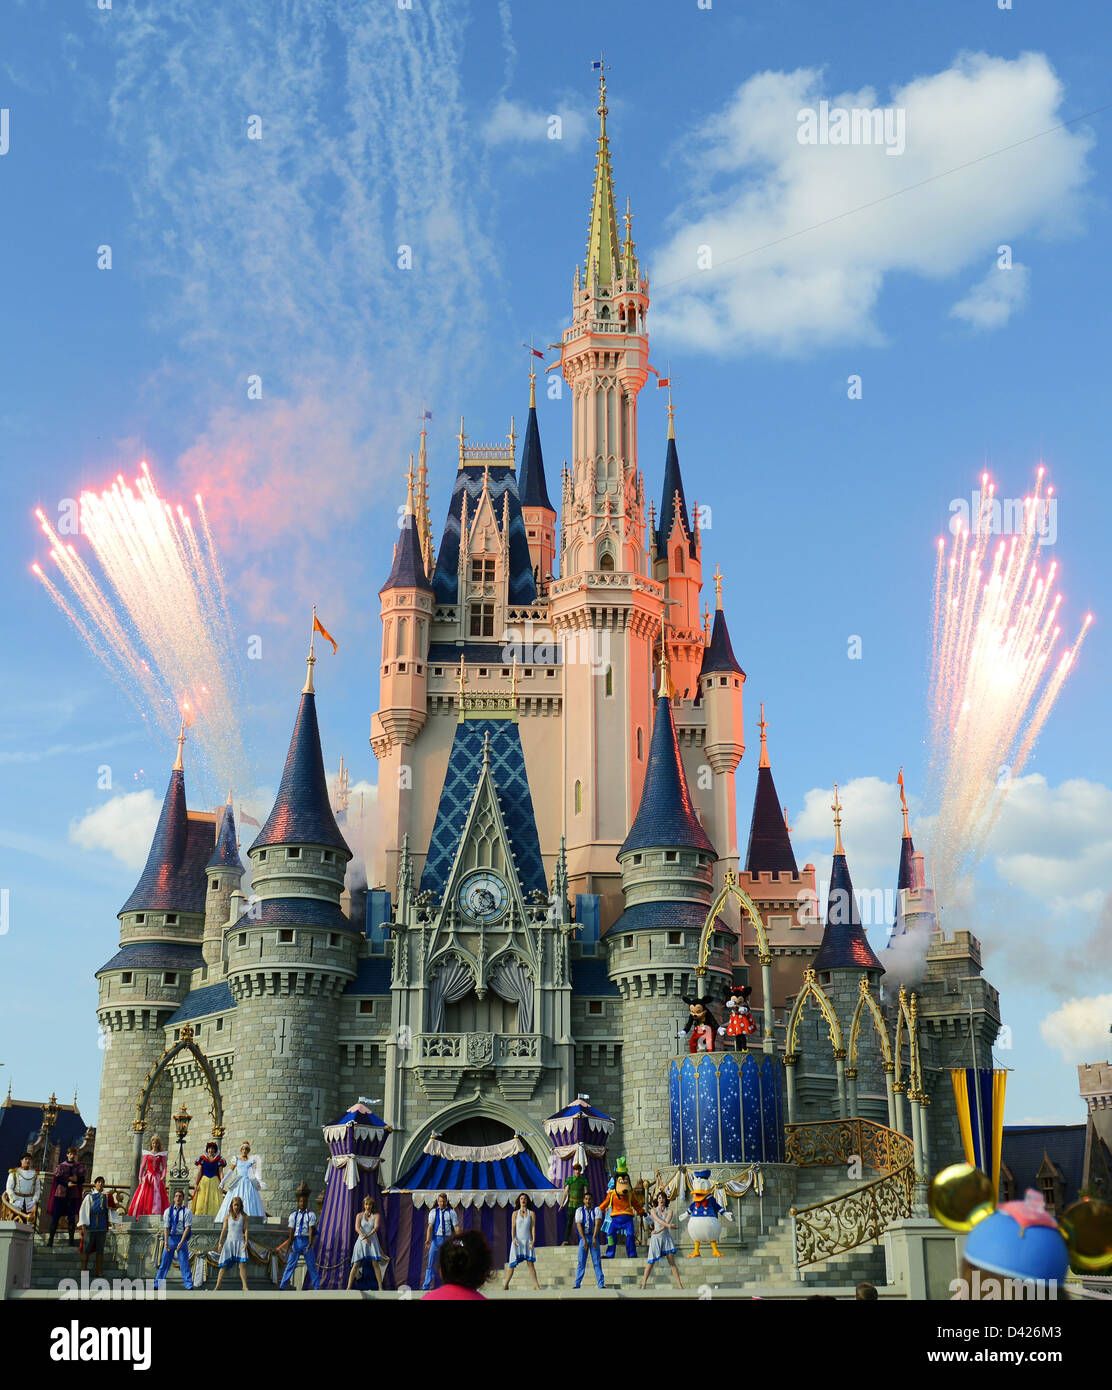 Fireworks go off at the finale of a dancing show featuring Micky, Minnie and other characters at Disney World's castle, Orlando. Stock Photo